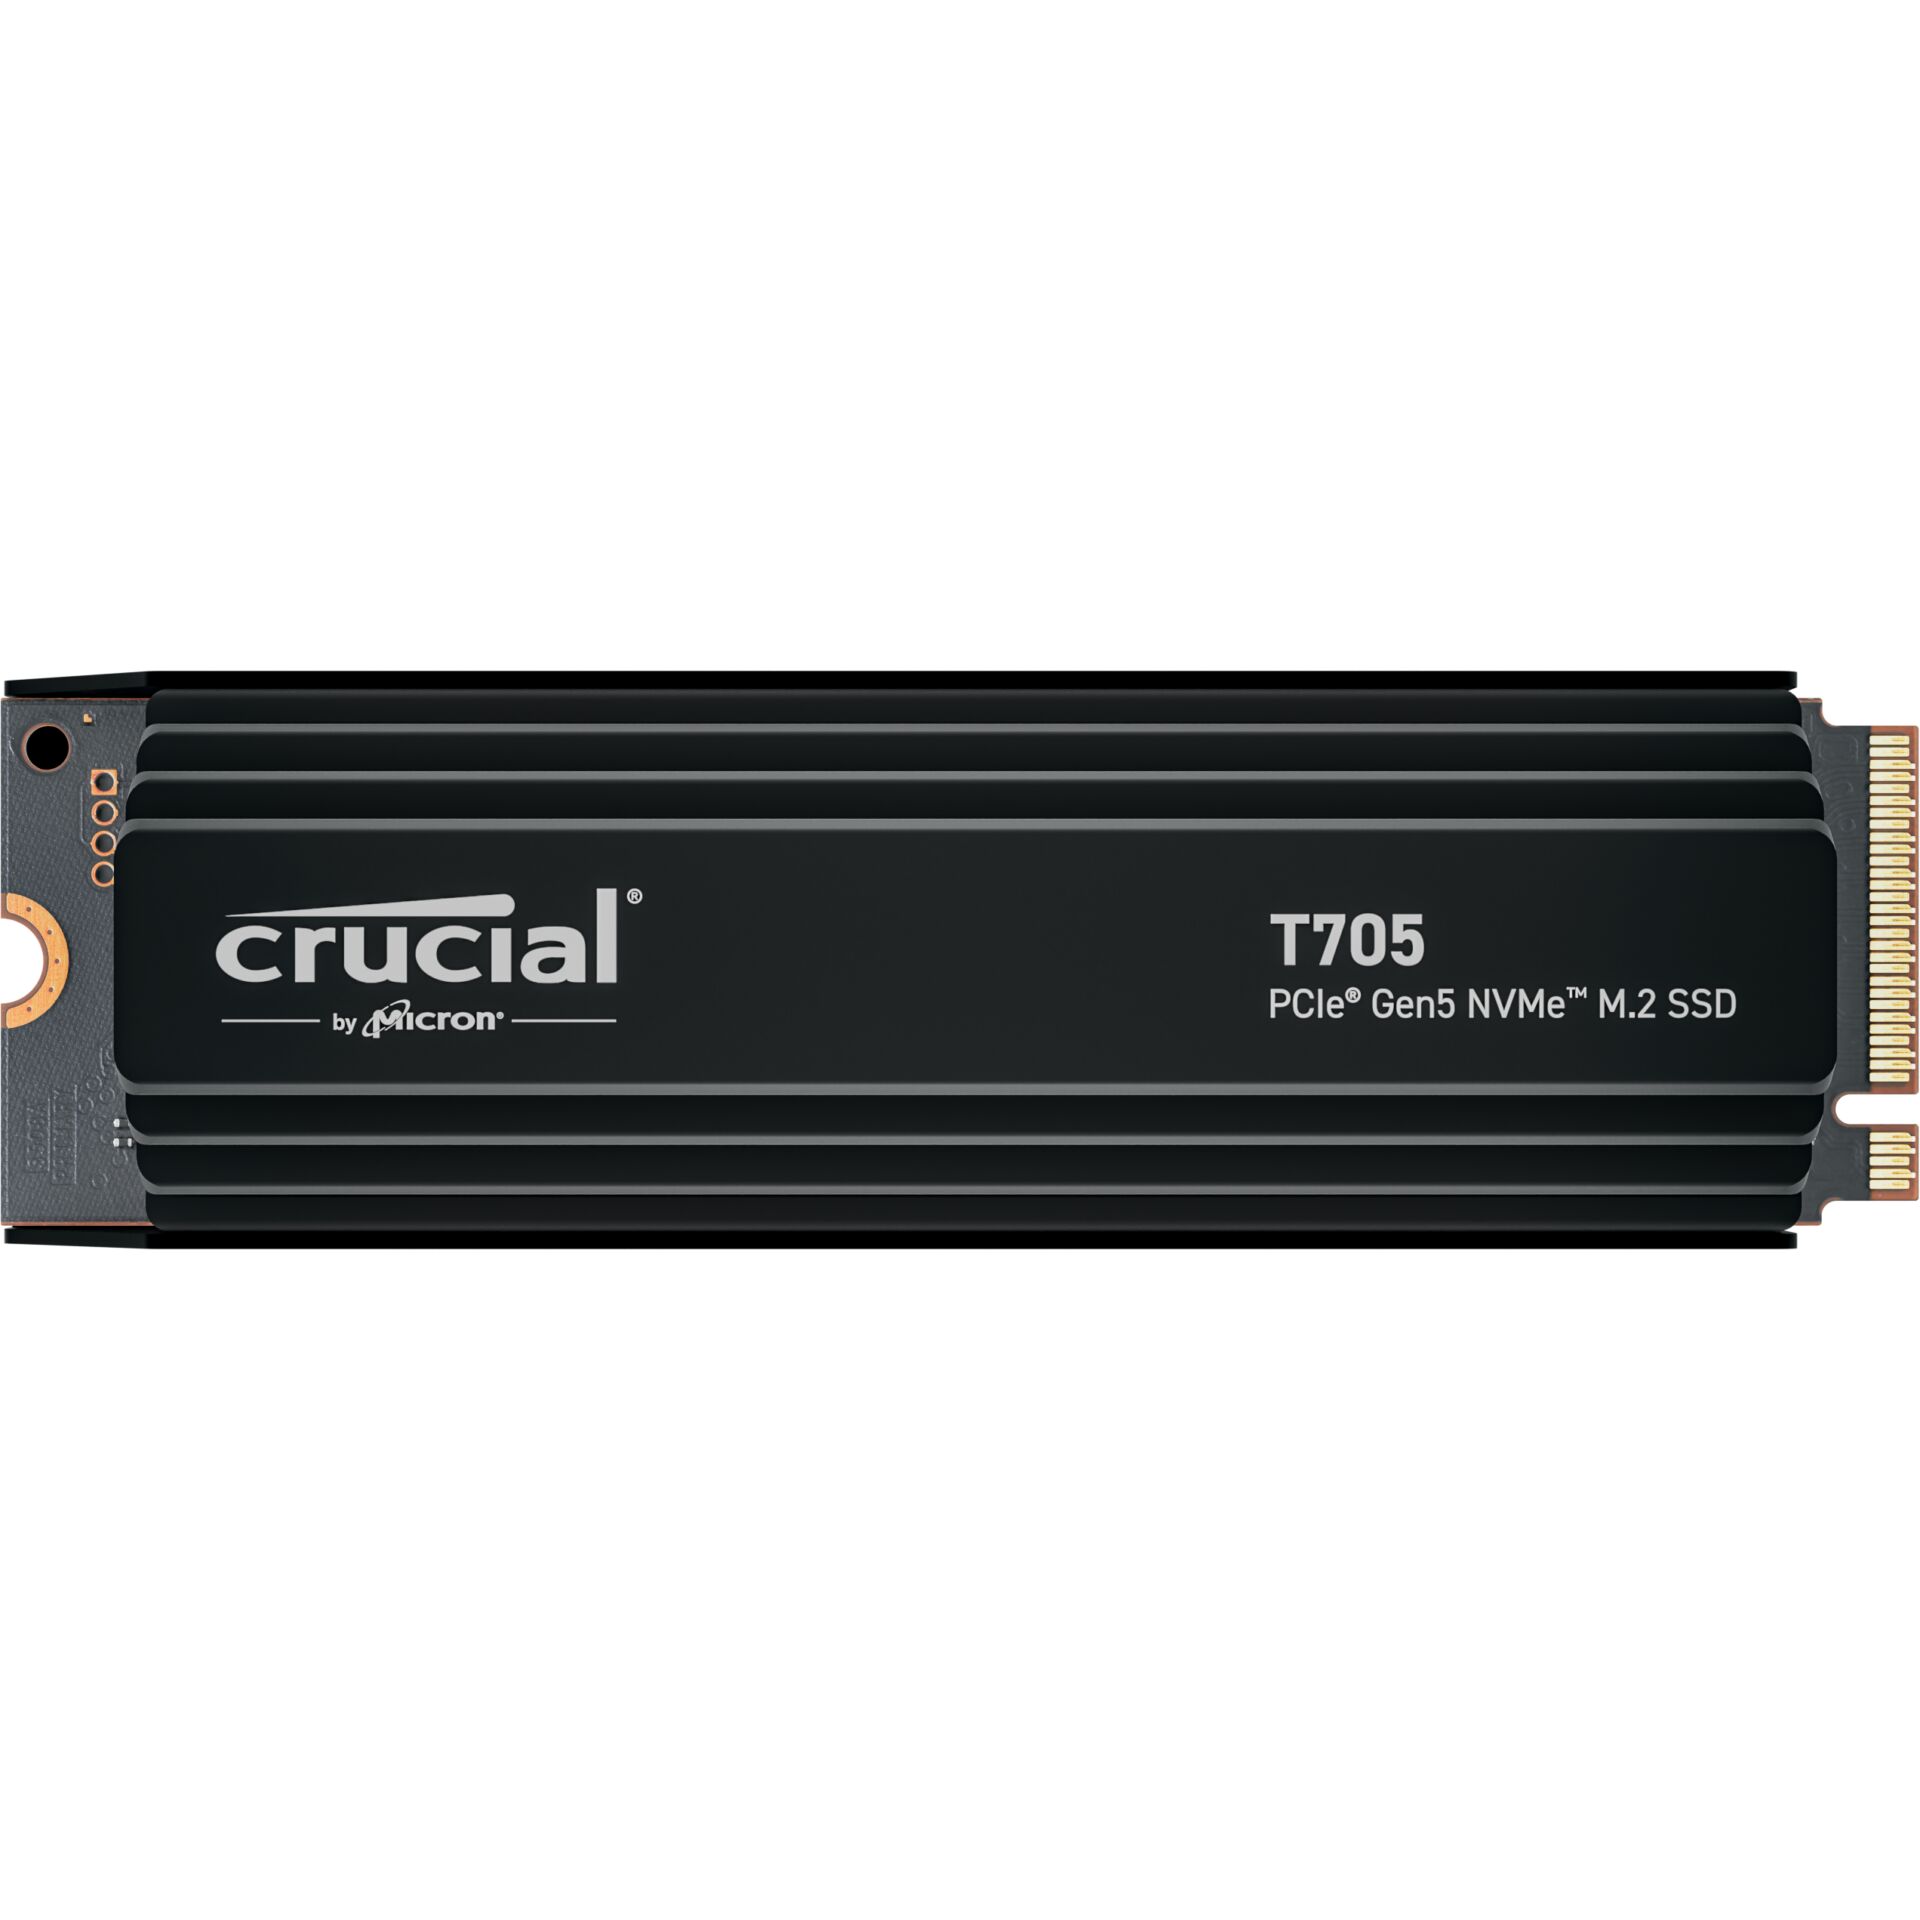 1.0 TB SSD Crucial T705 SSD, M.2/M-Key (PCIe 5.0 x4), lesen: 13600MB/s, schreiben: 10200MB/s SLC-Cached, TBW: 600TB